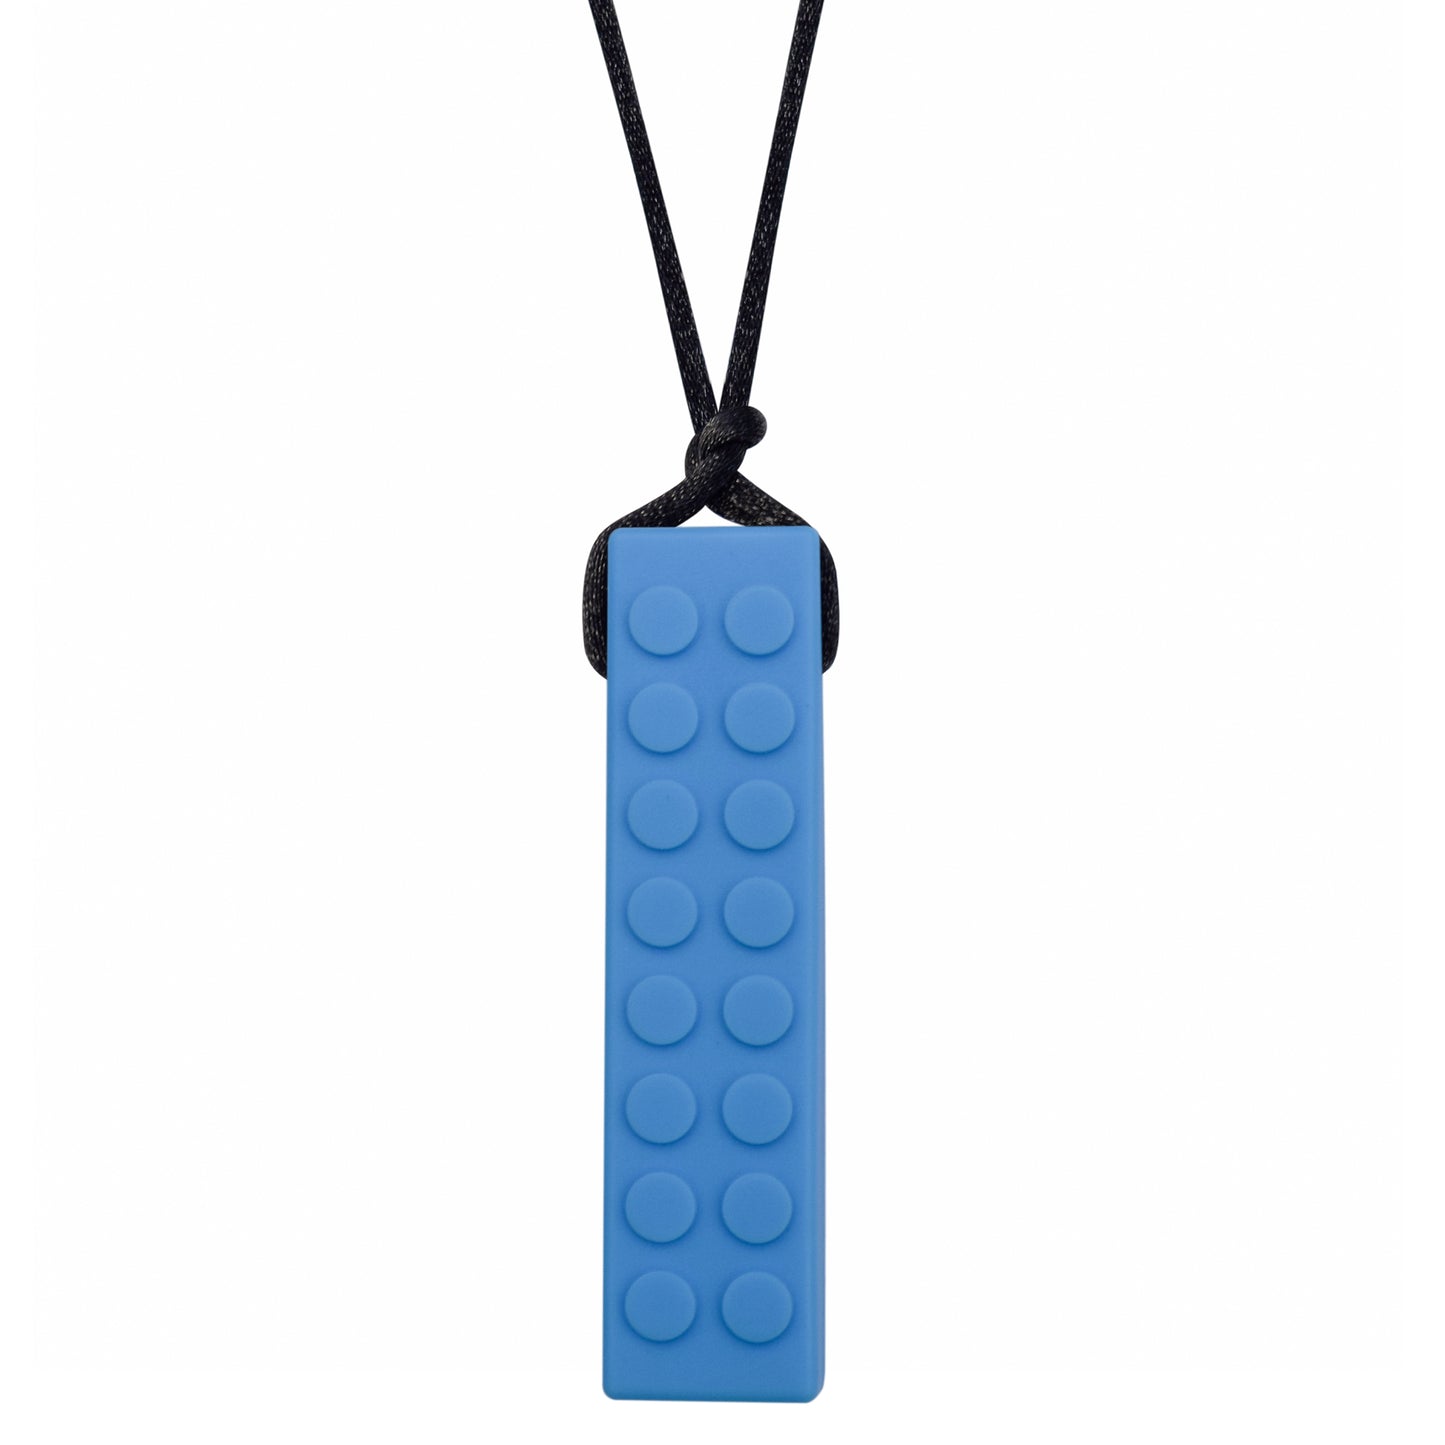 Kids Blue LEGO Brick shaped anxiety necklace